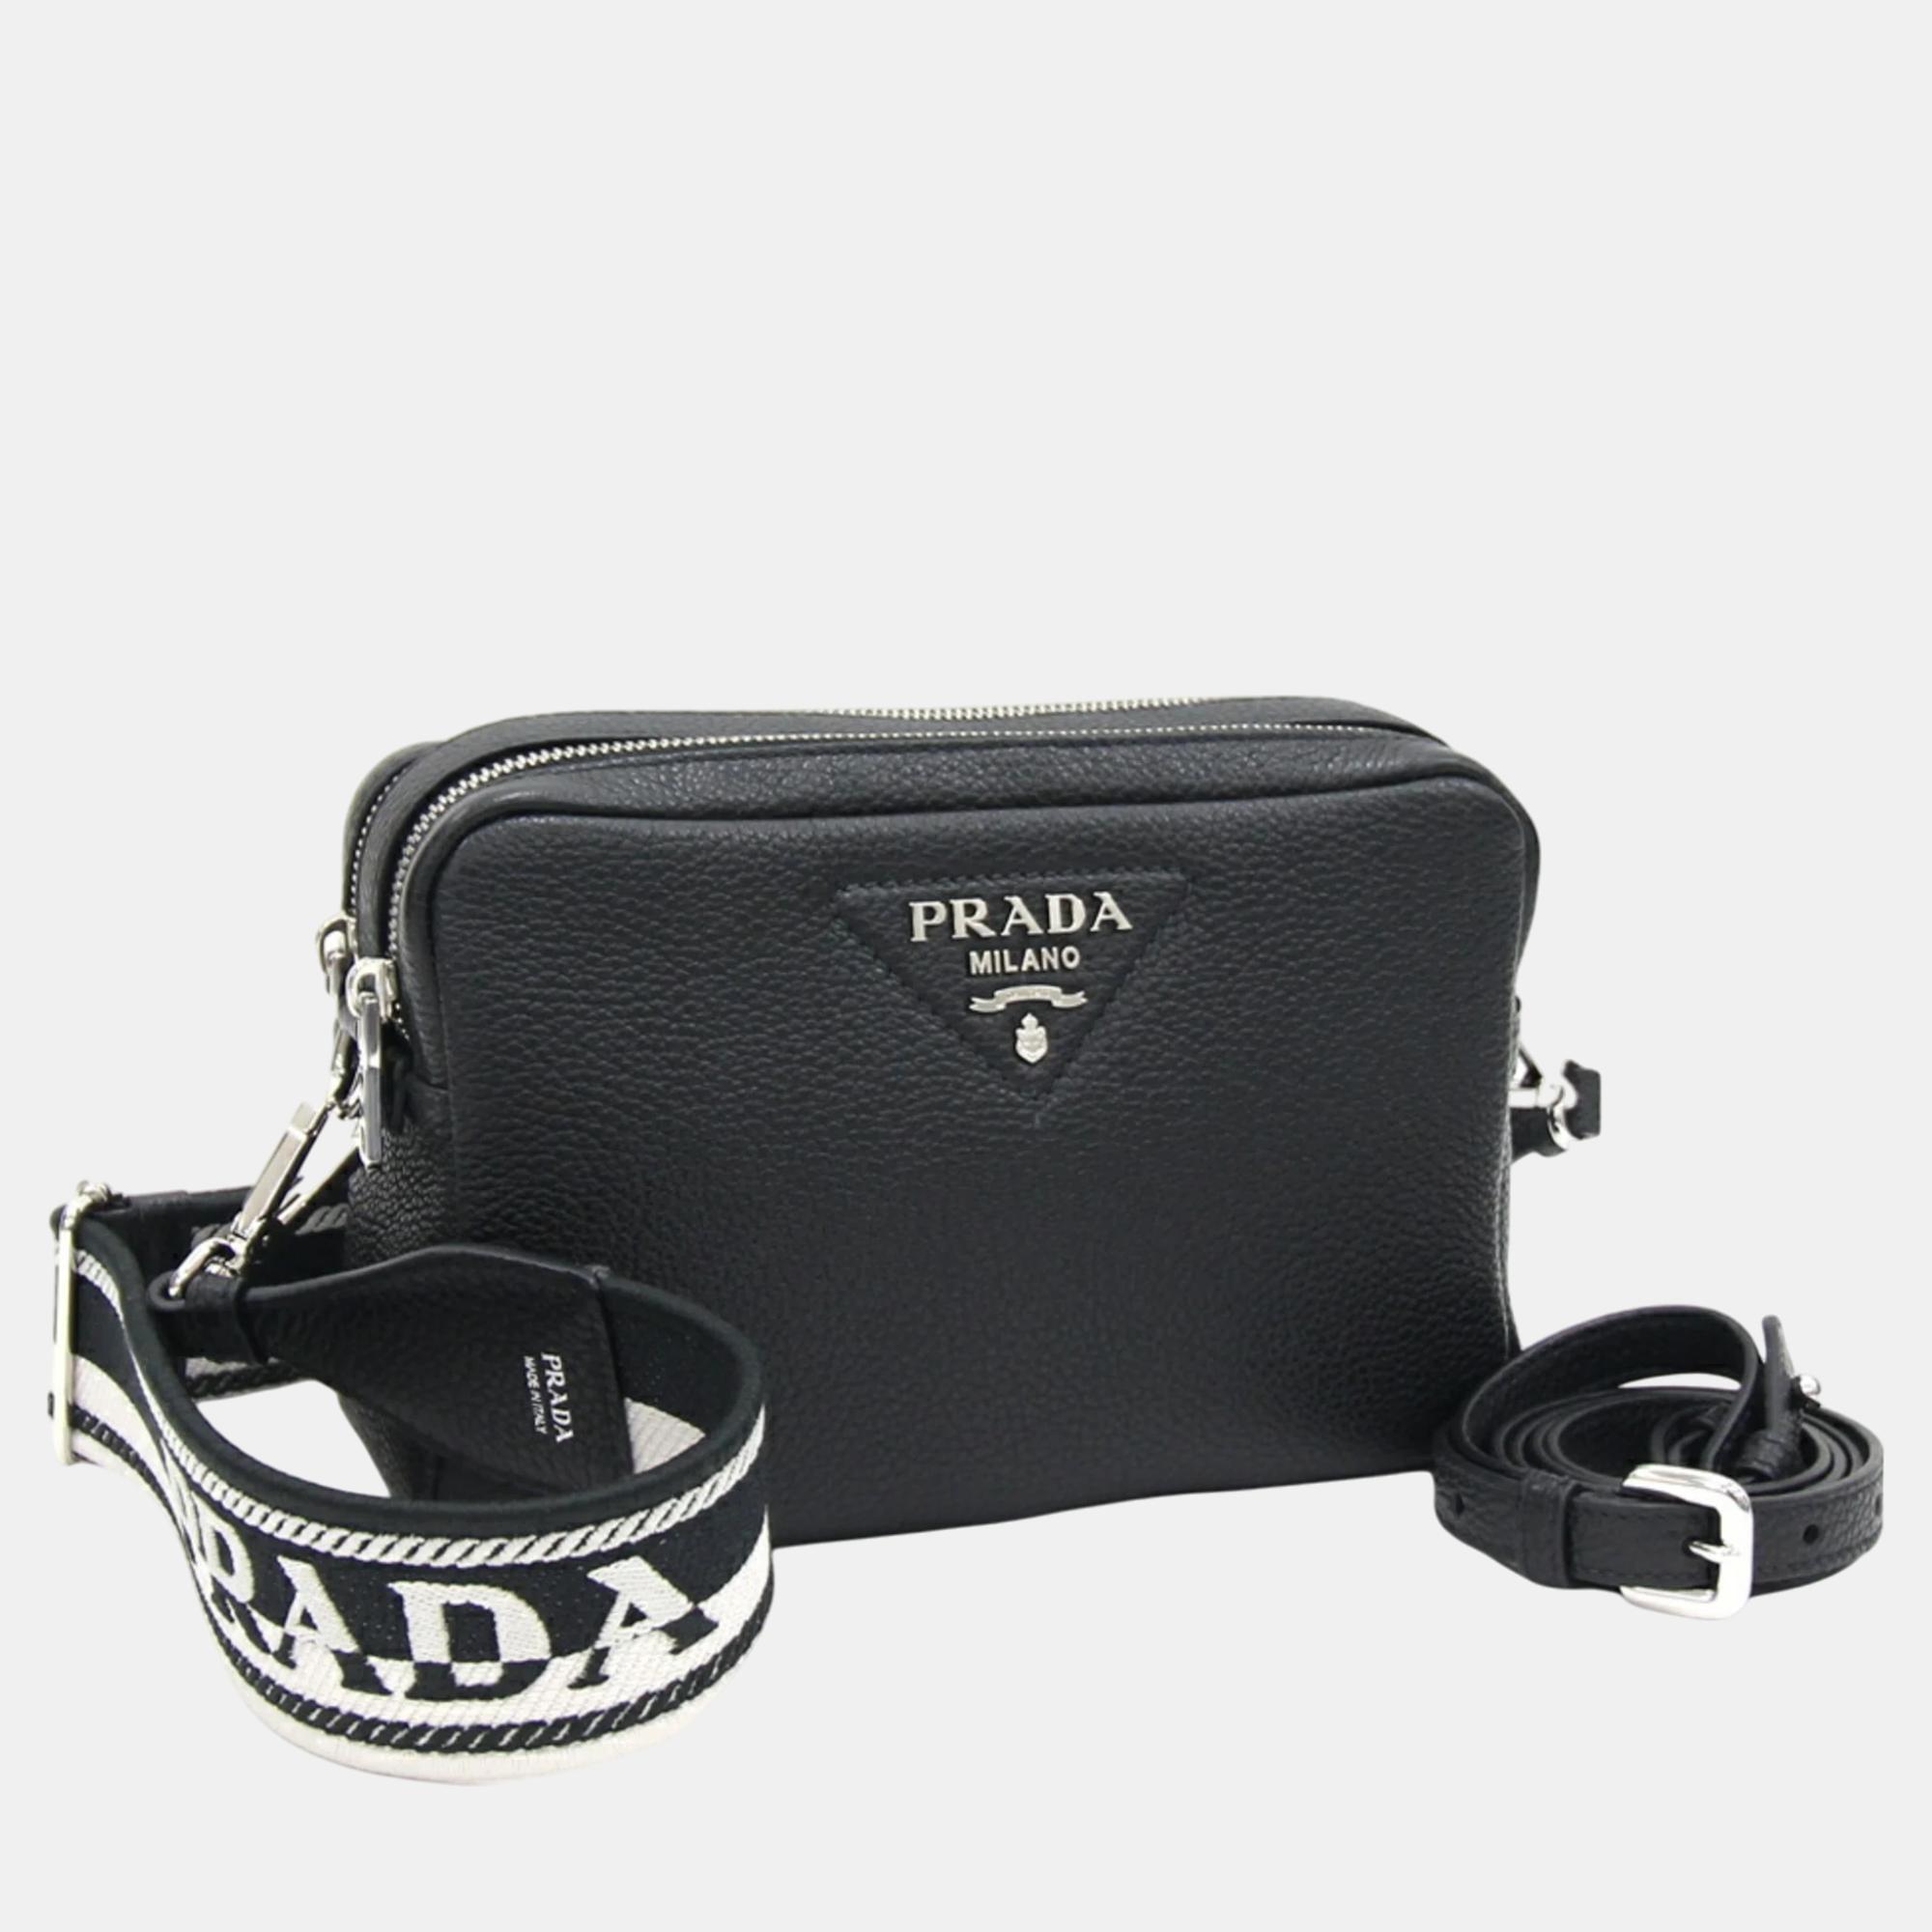 Crafted with precision this Prada bag combines luxurious materials with impeccable design ensuring you make a sophisticated statement wherever you go. Invest in it today.